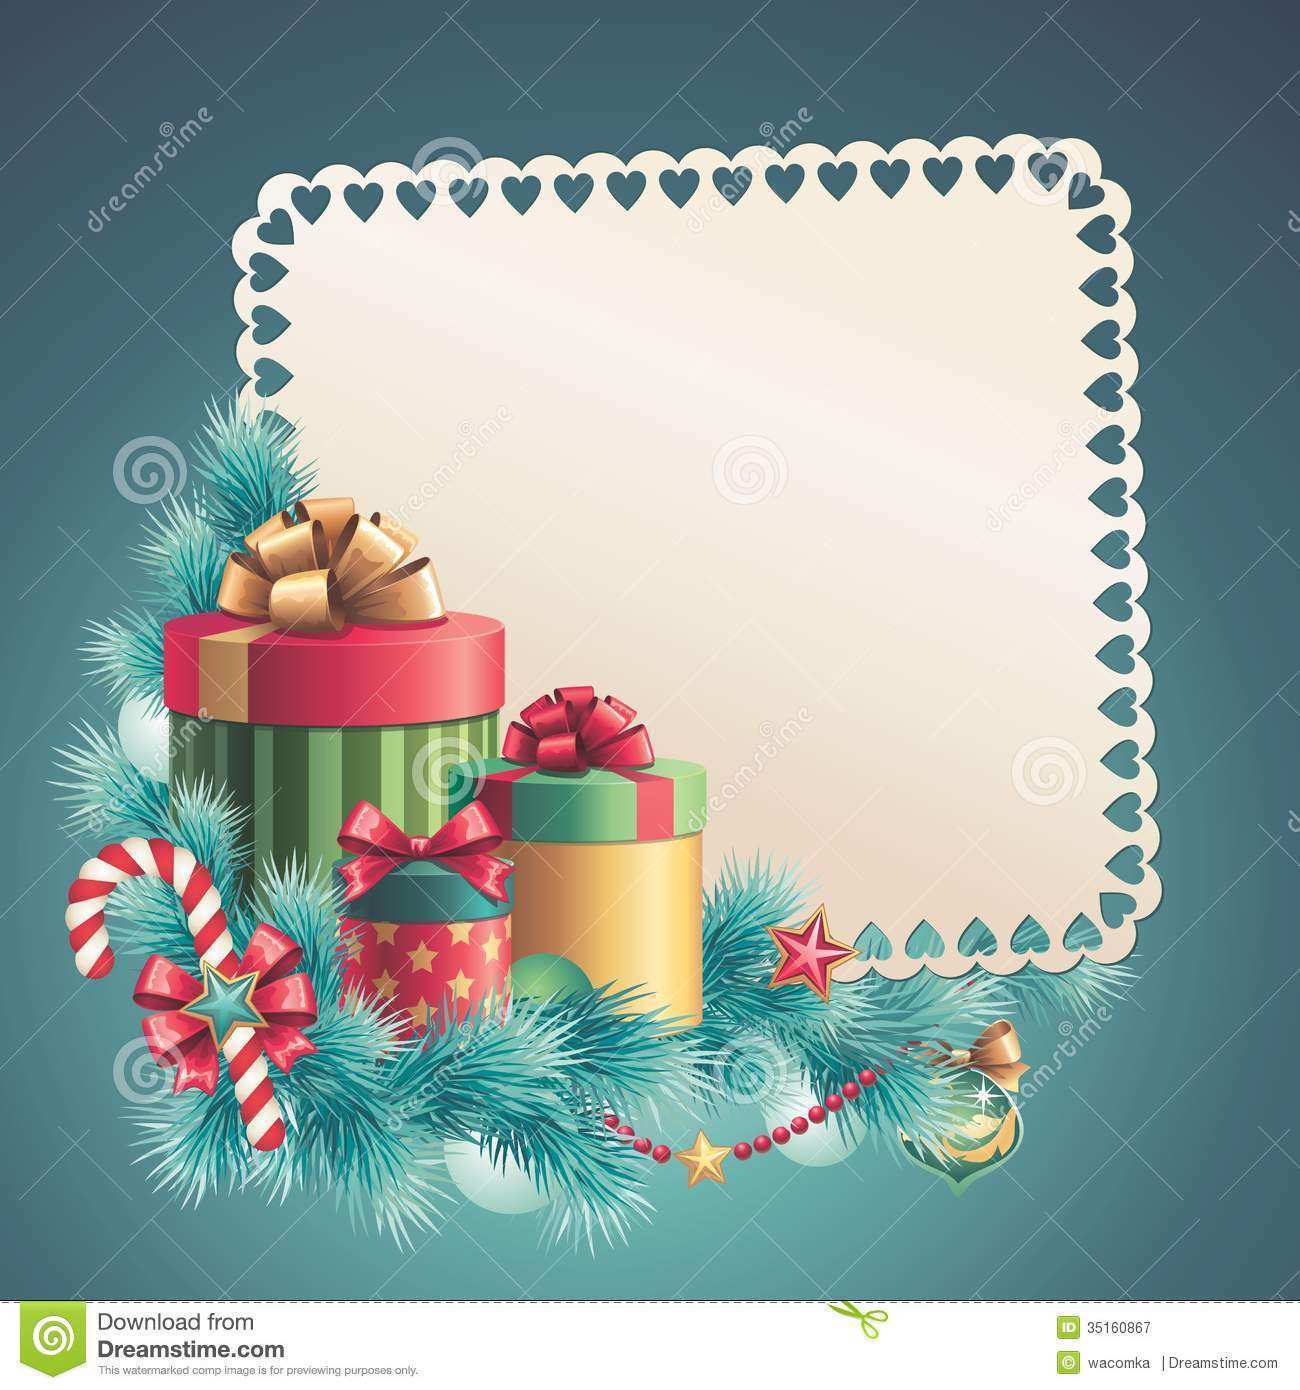 29 Customize Our Free Christmas Card Templates Blank Maker with Christmas Card Templates Blank